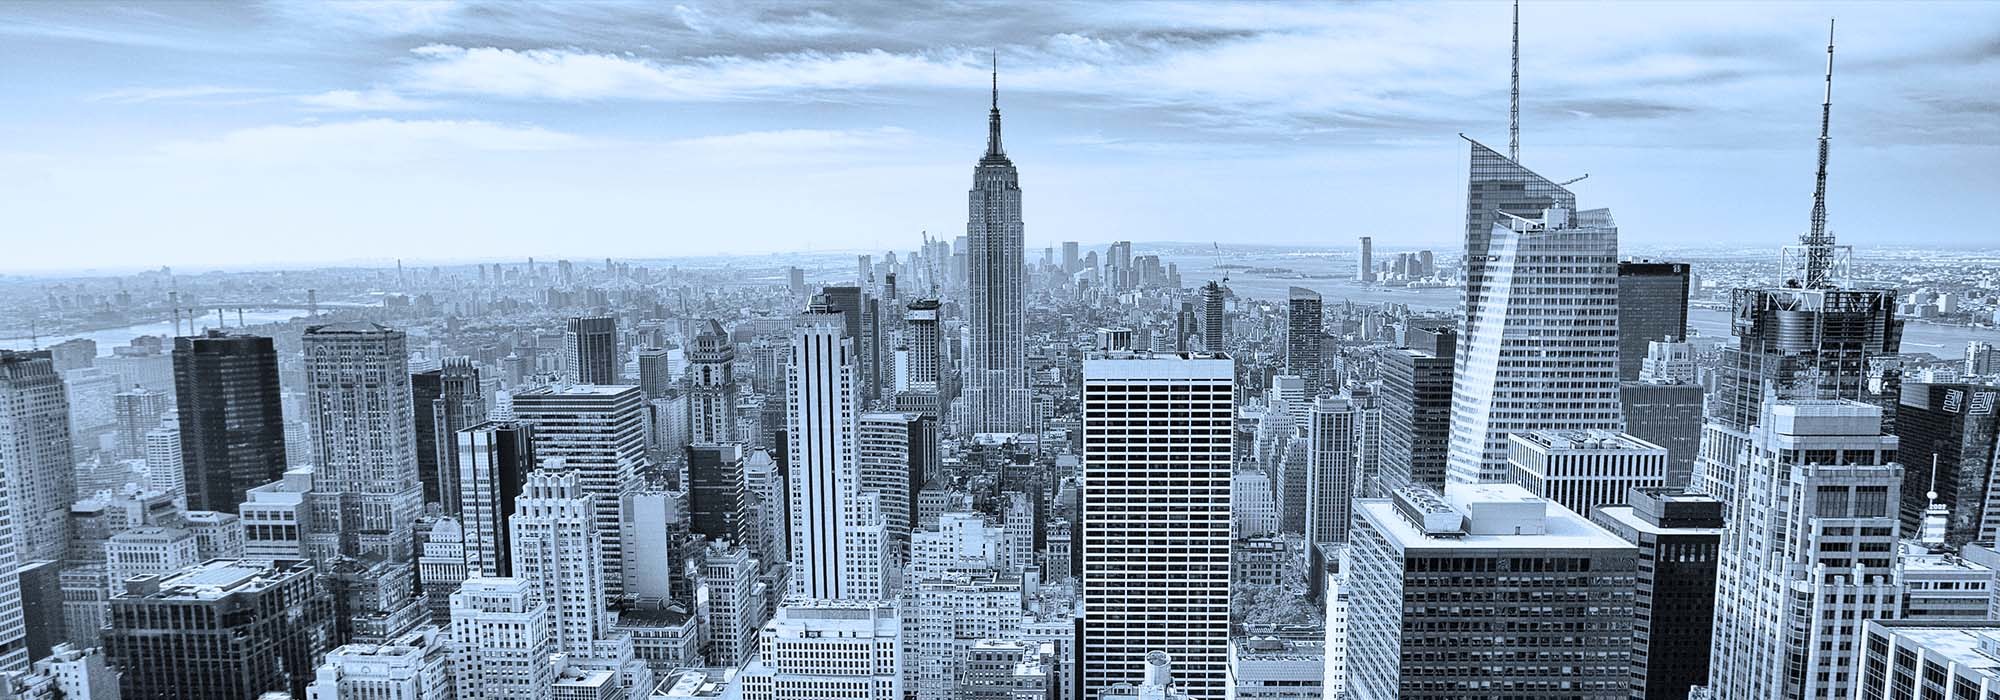 New York skyline centered on the empire state building